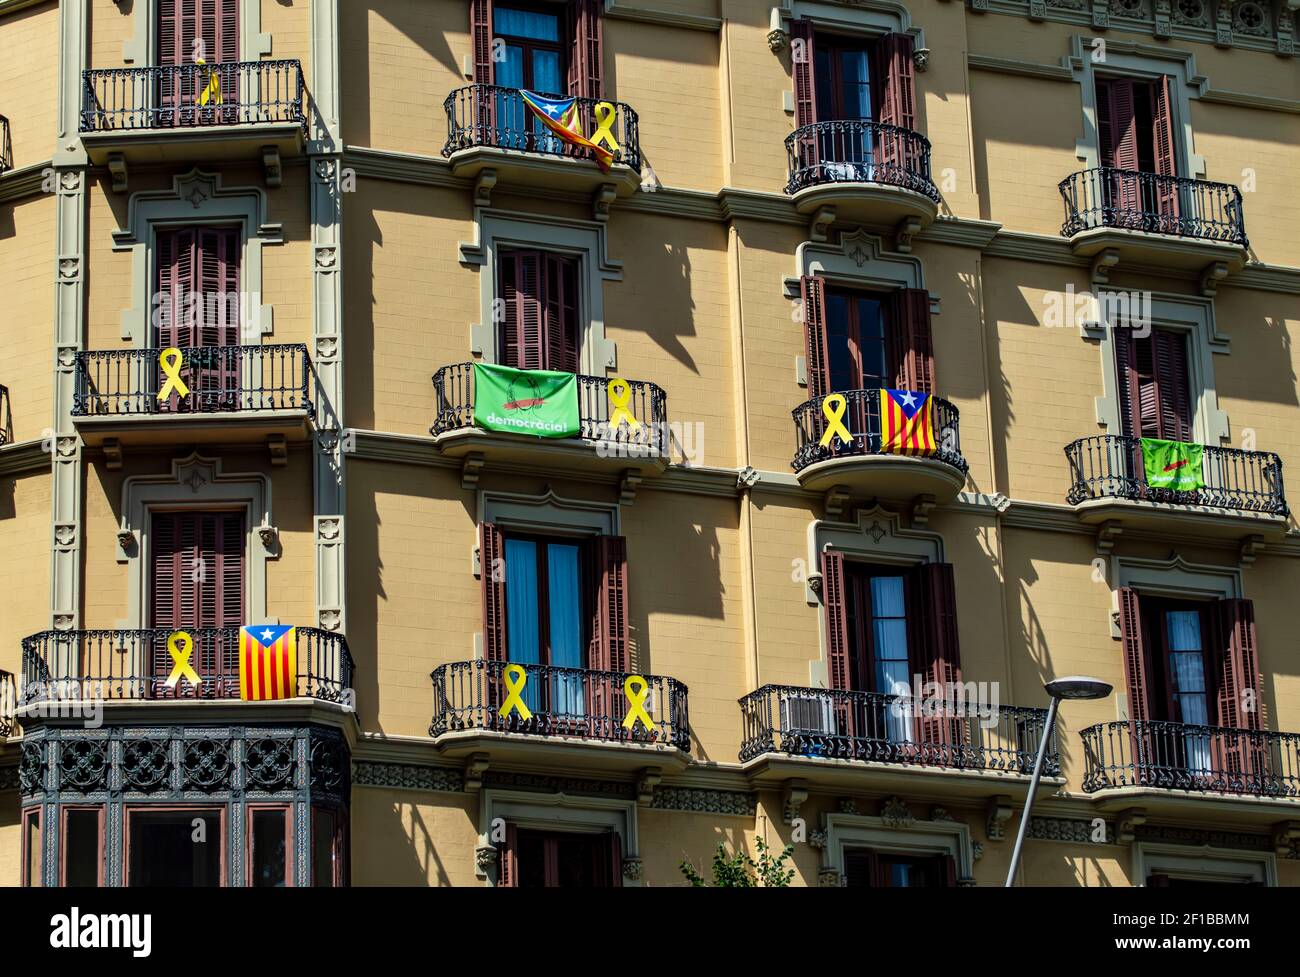 Barcelona, Spain - July 24, 2019: Catalan flags and protest ribbons on balconies of a building in the city of Barcelona, Catalonia, Spain Stock Photo